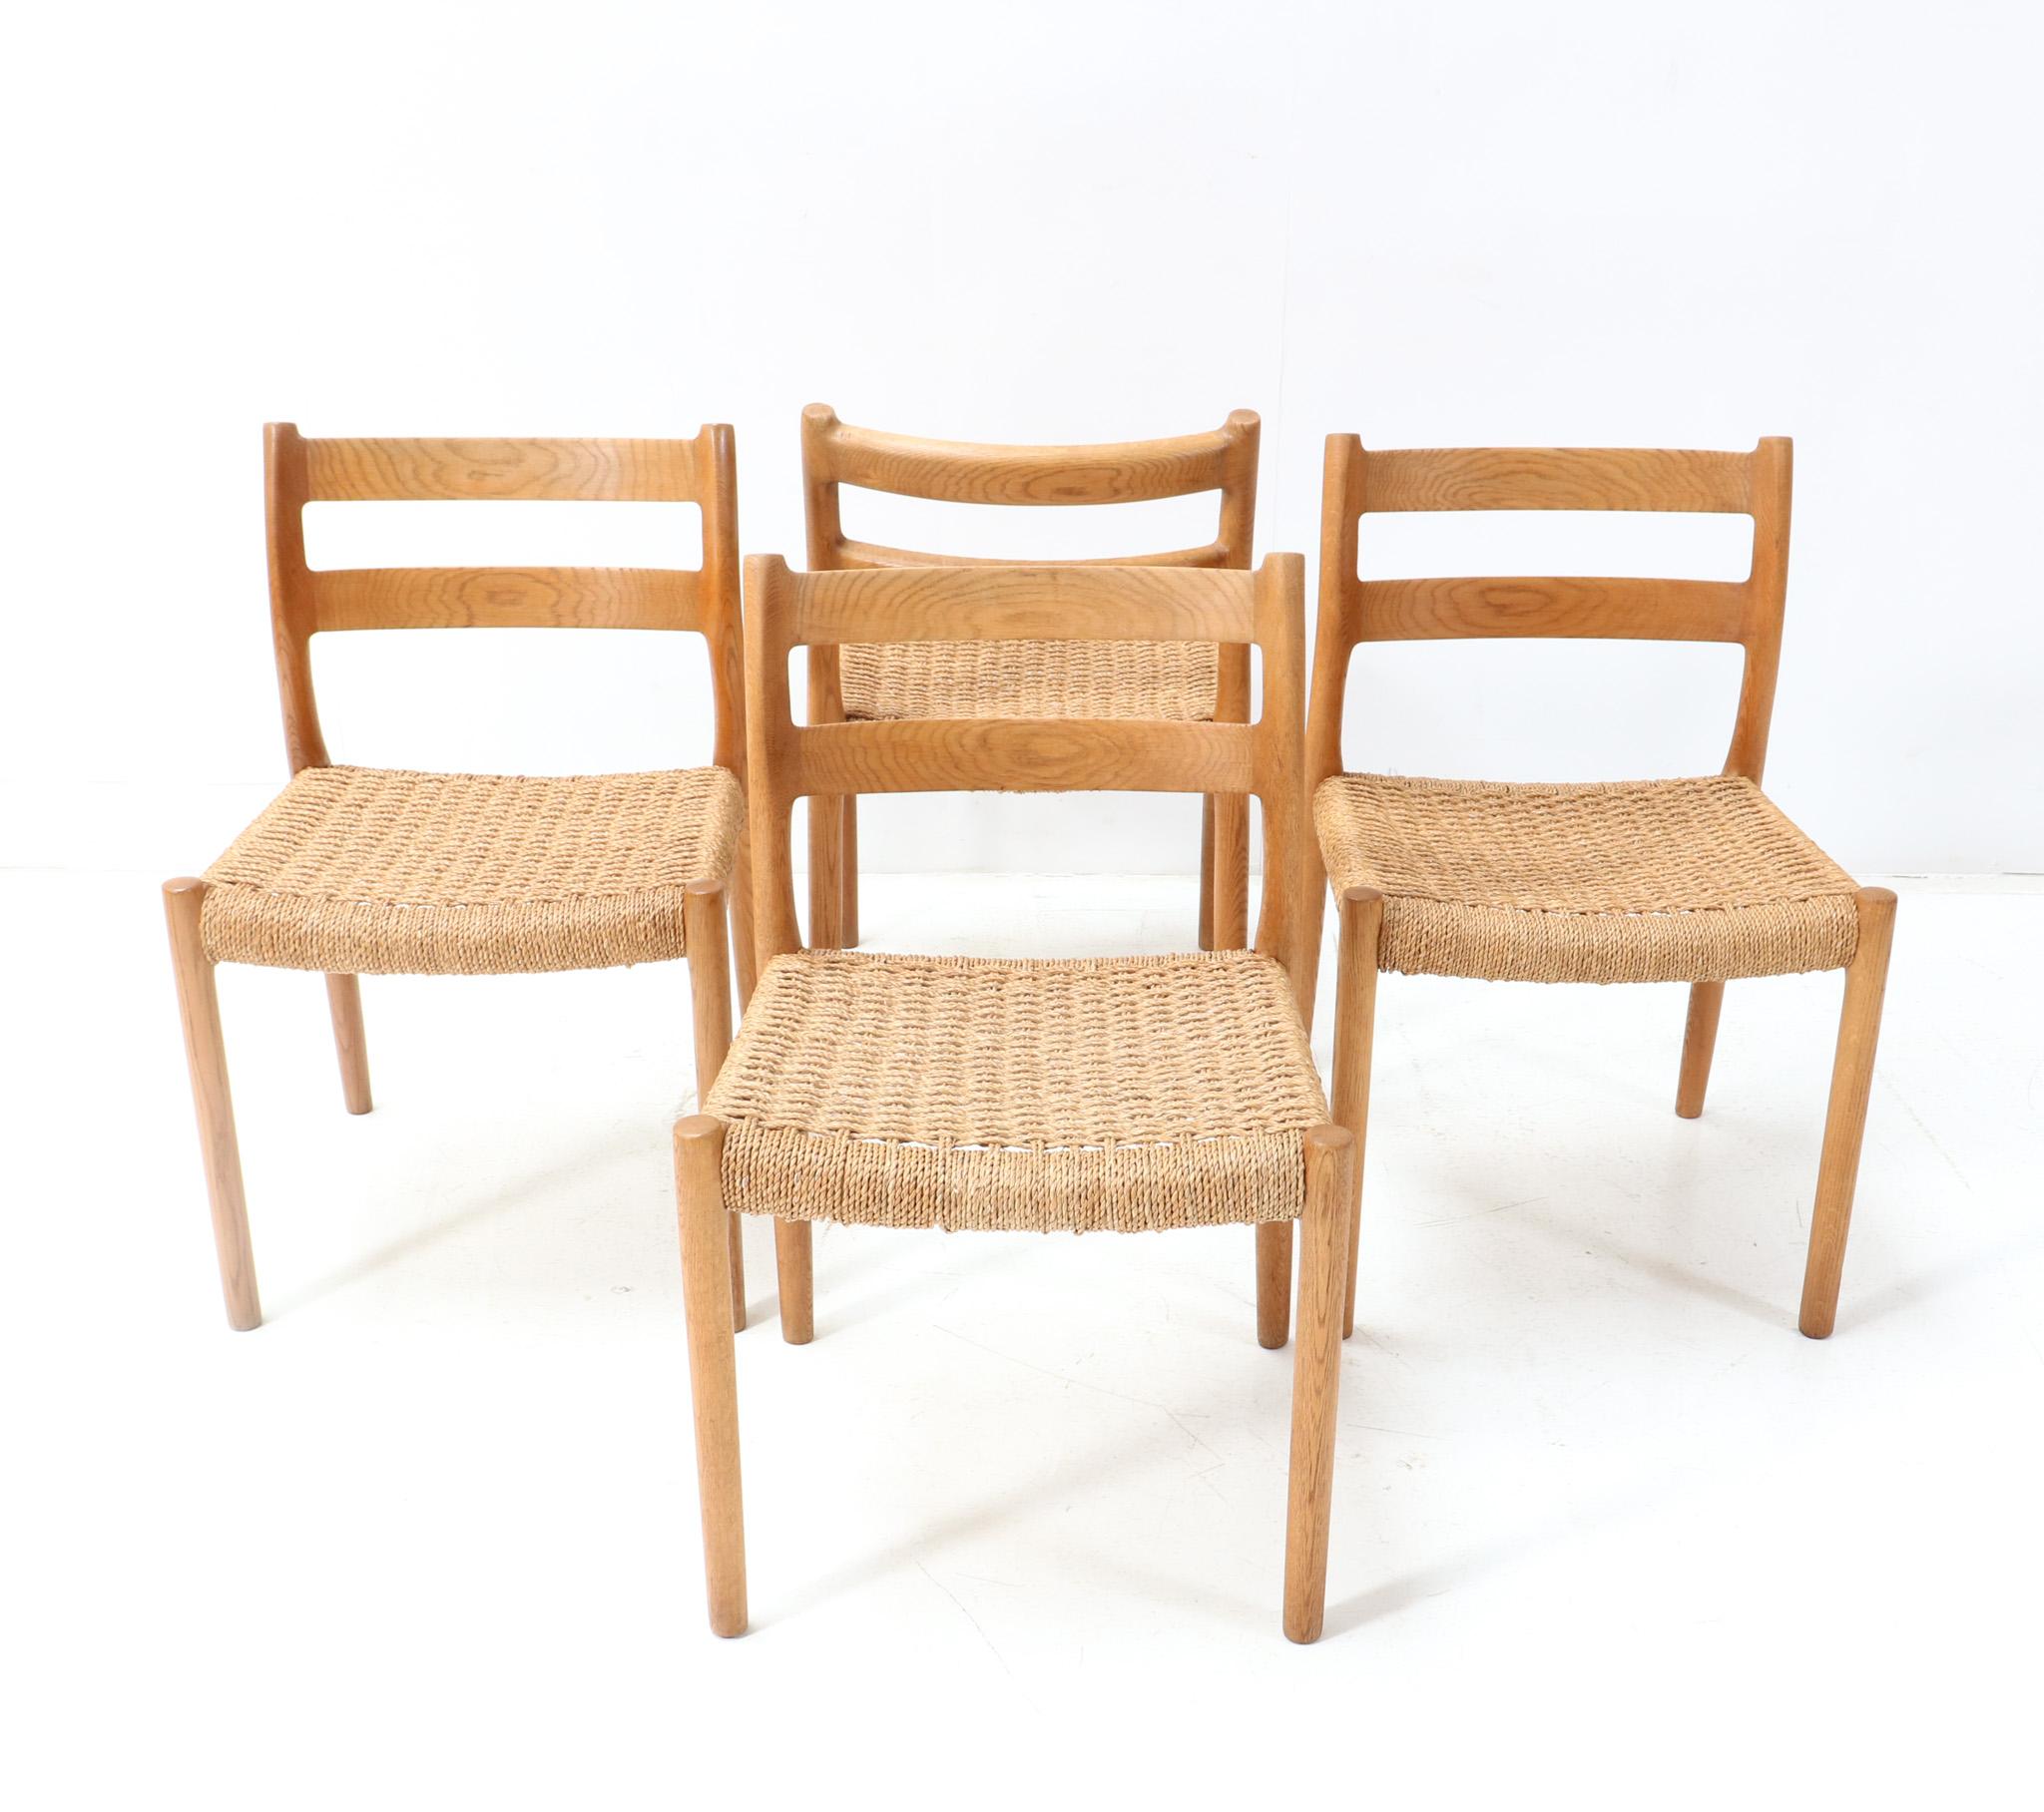 Stunning set of four Mid-Century Modern Model 84 dining room chairs.
Design by Niels Otto Møller for J.L. Møllers Møbelfabrik.
Striking Danish design from the 1970s.
Elegant shaped solid oak frames with original papercord seats.
Marked with original